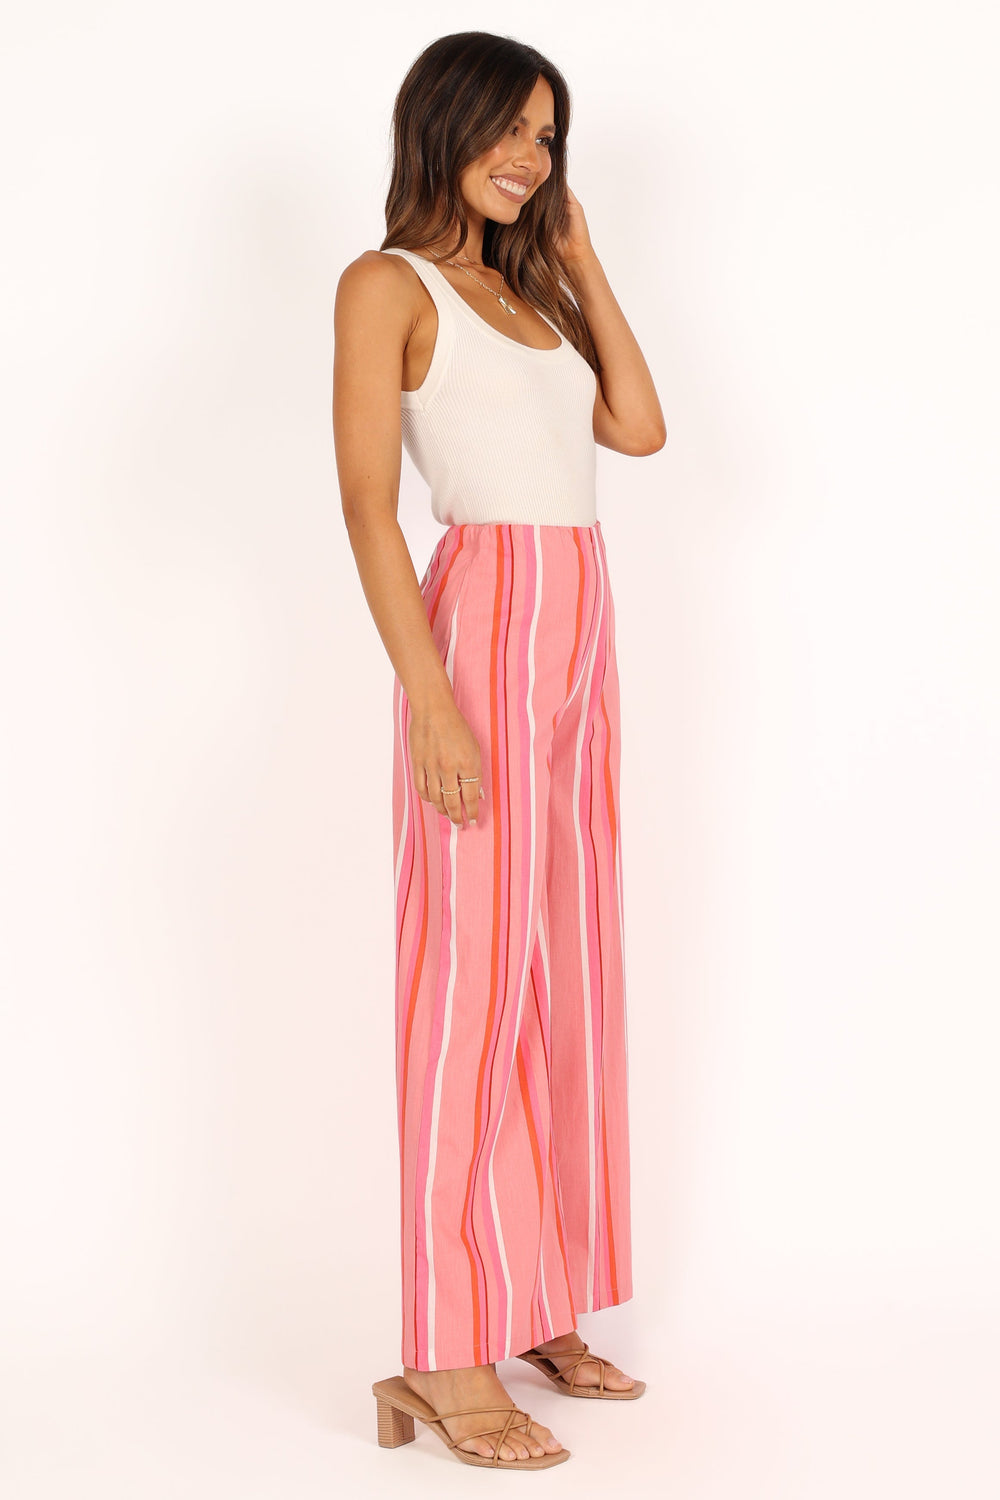 Hot Pink Lace Wide Leg Pants · Filly Flair